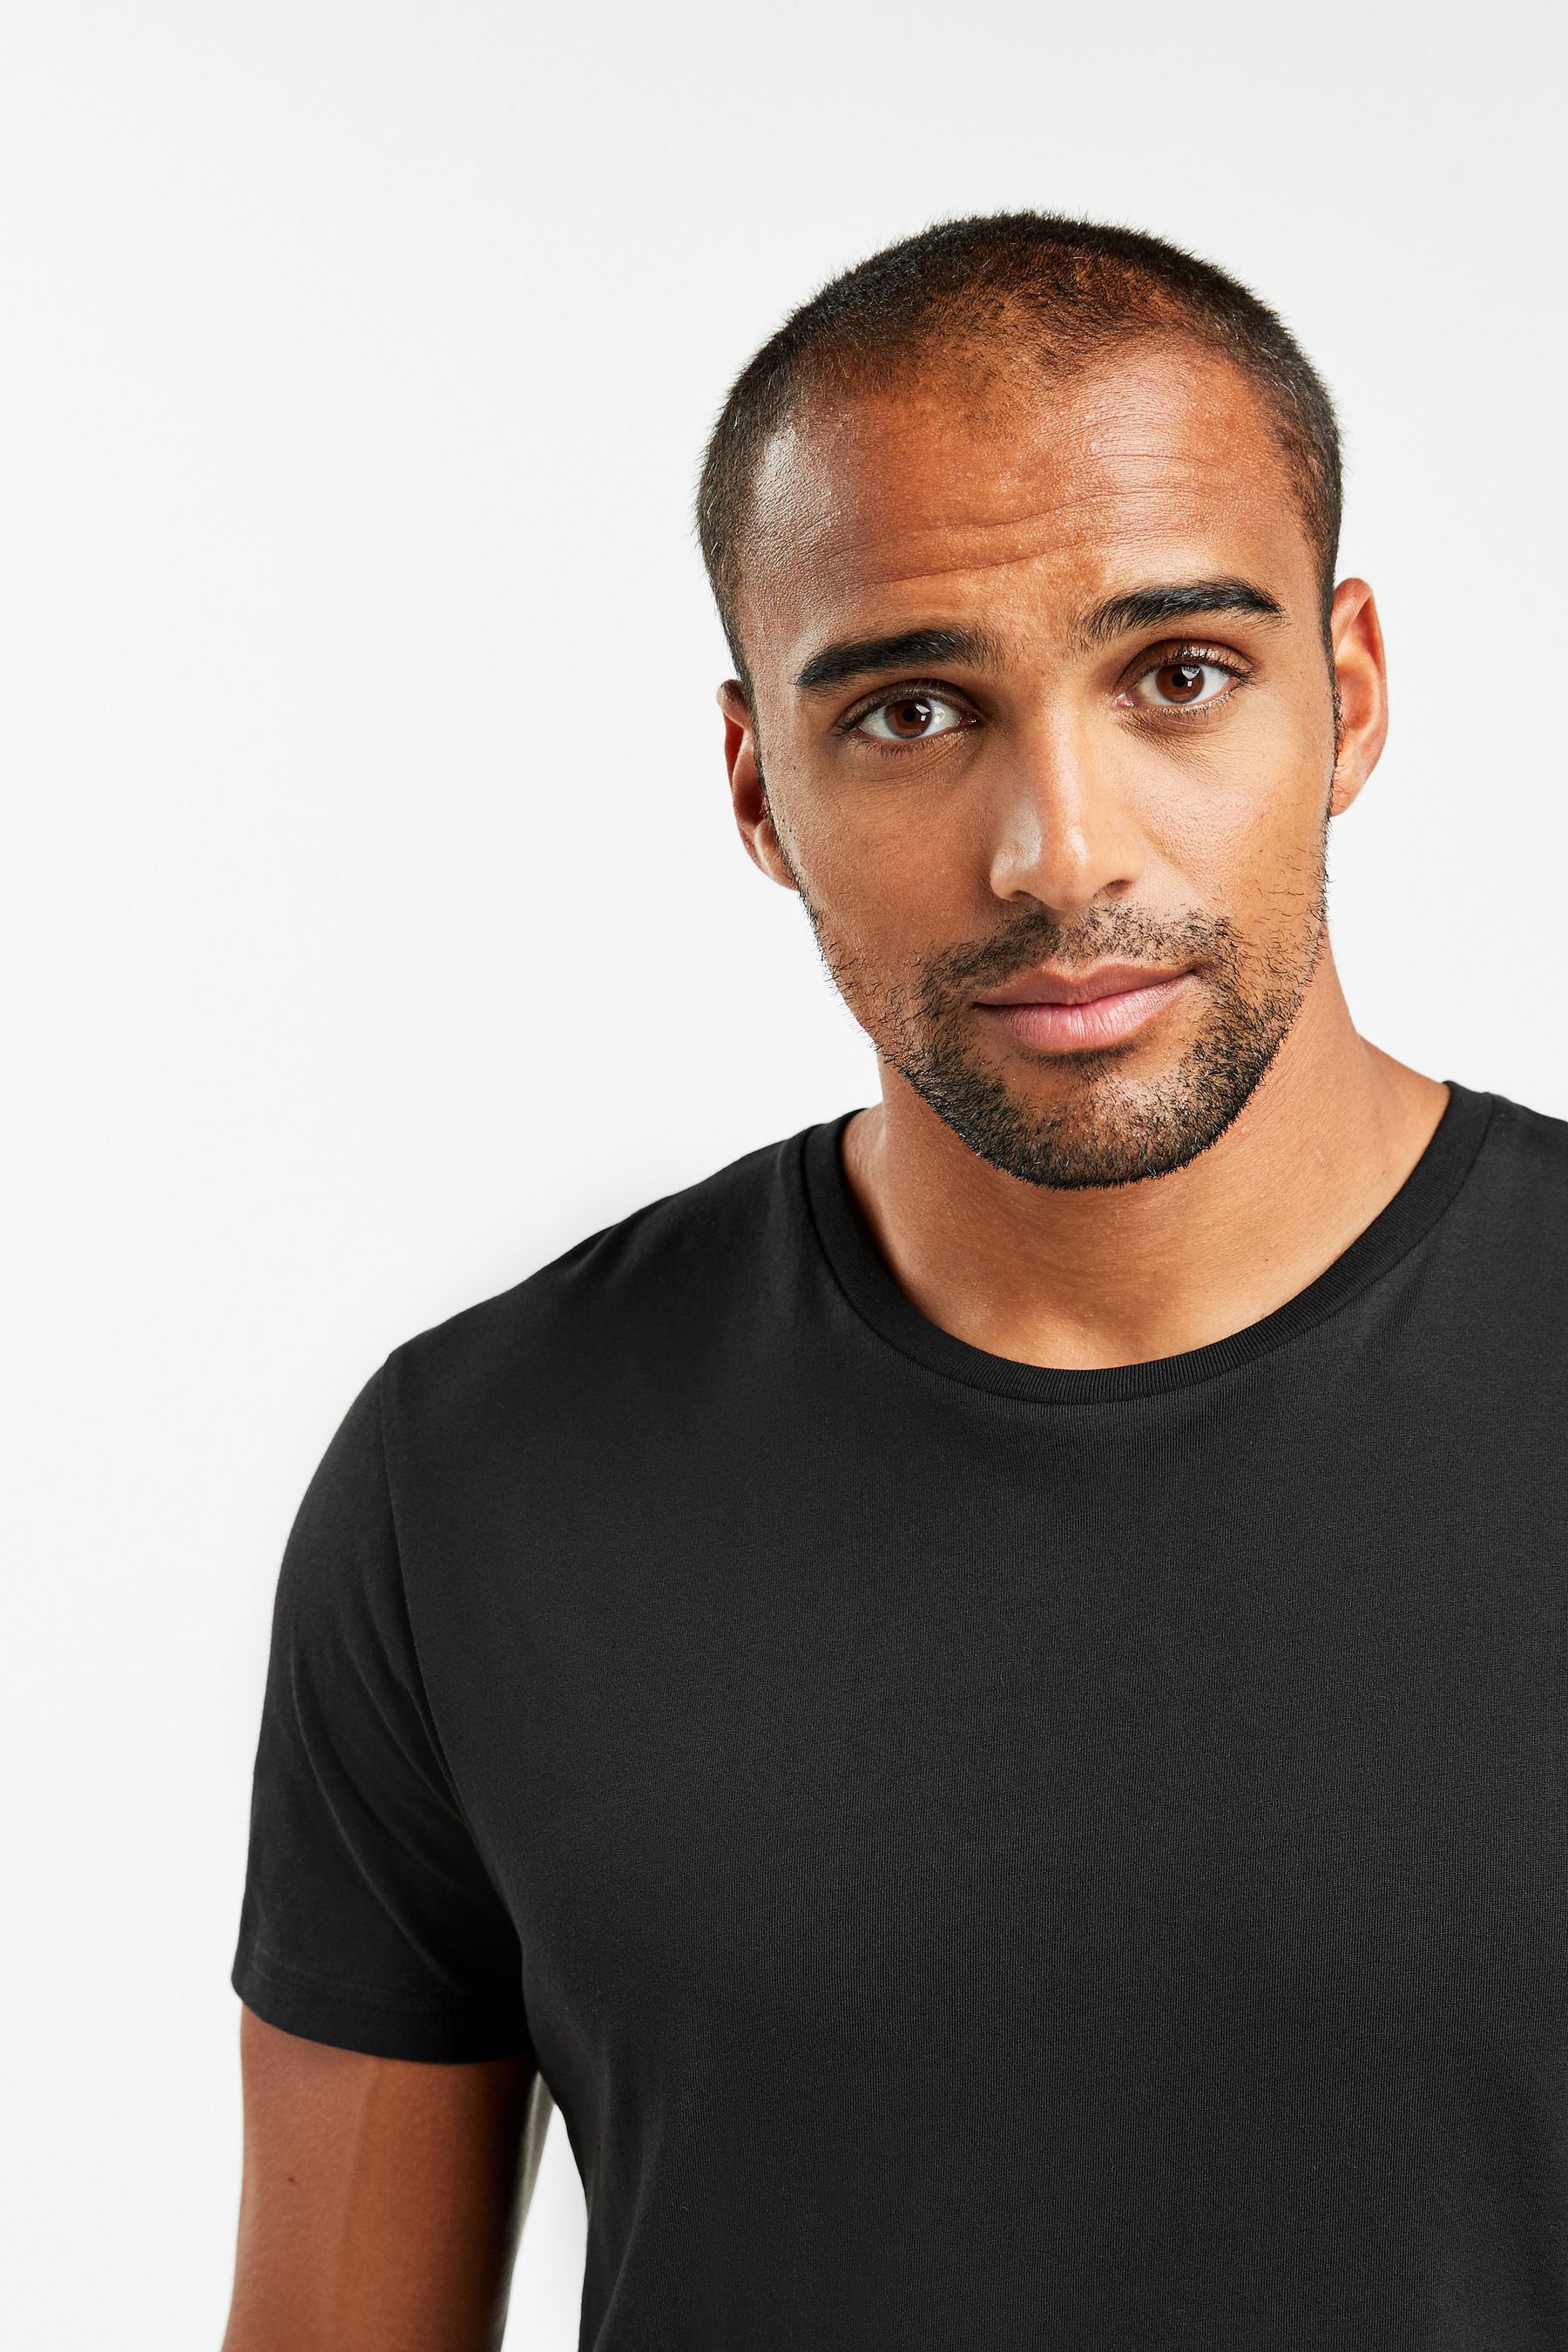 Buy Black Slim Fit T-Shirts 5 Pack from the Next UK online shop